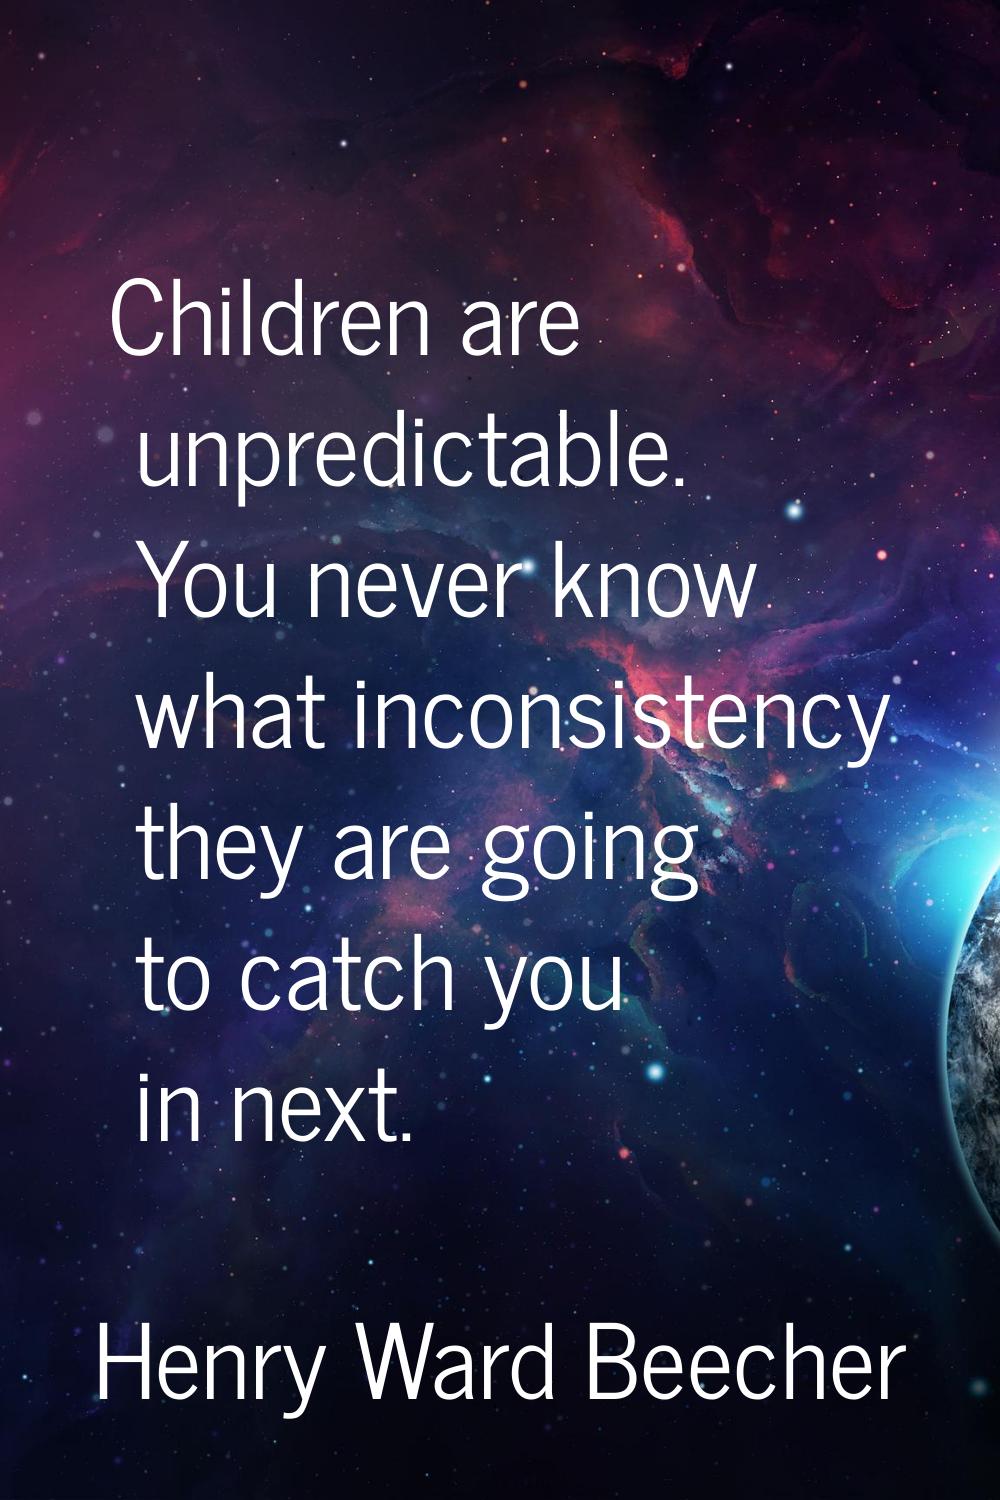 Children are unpredictable. You never know what inconsistency they are going to catch you in next.